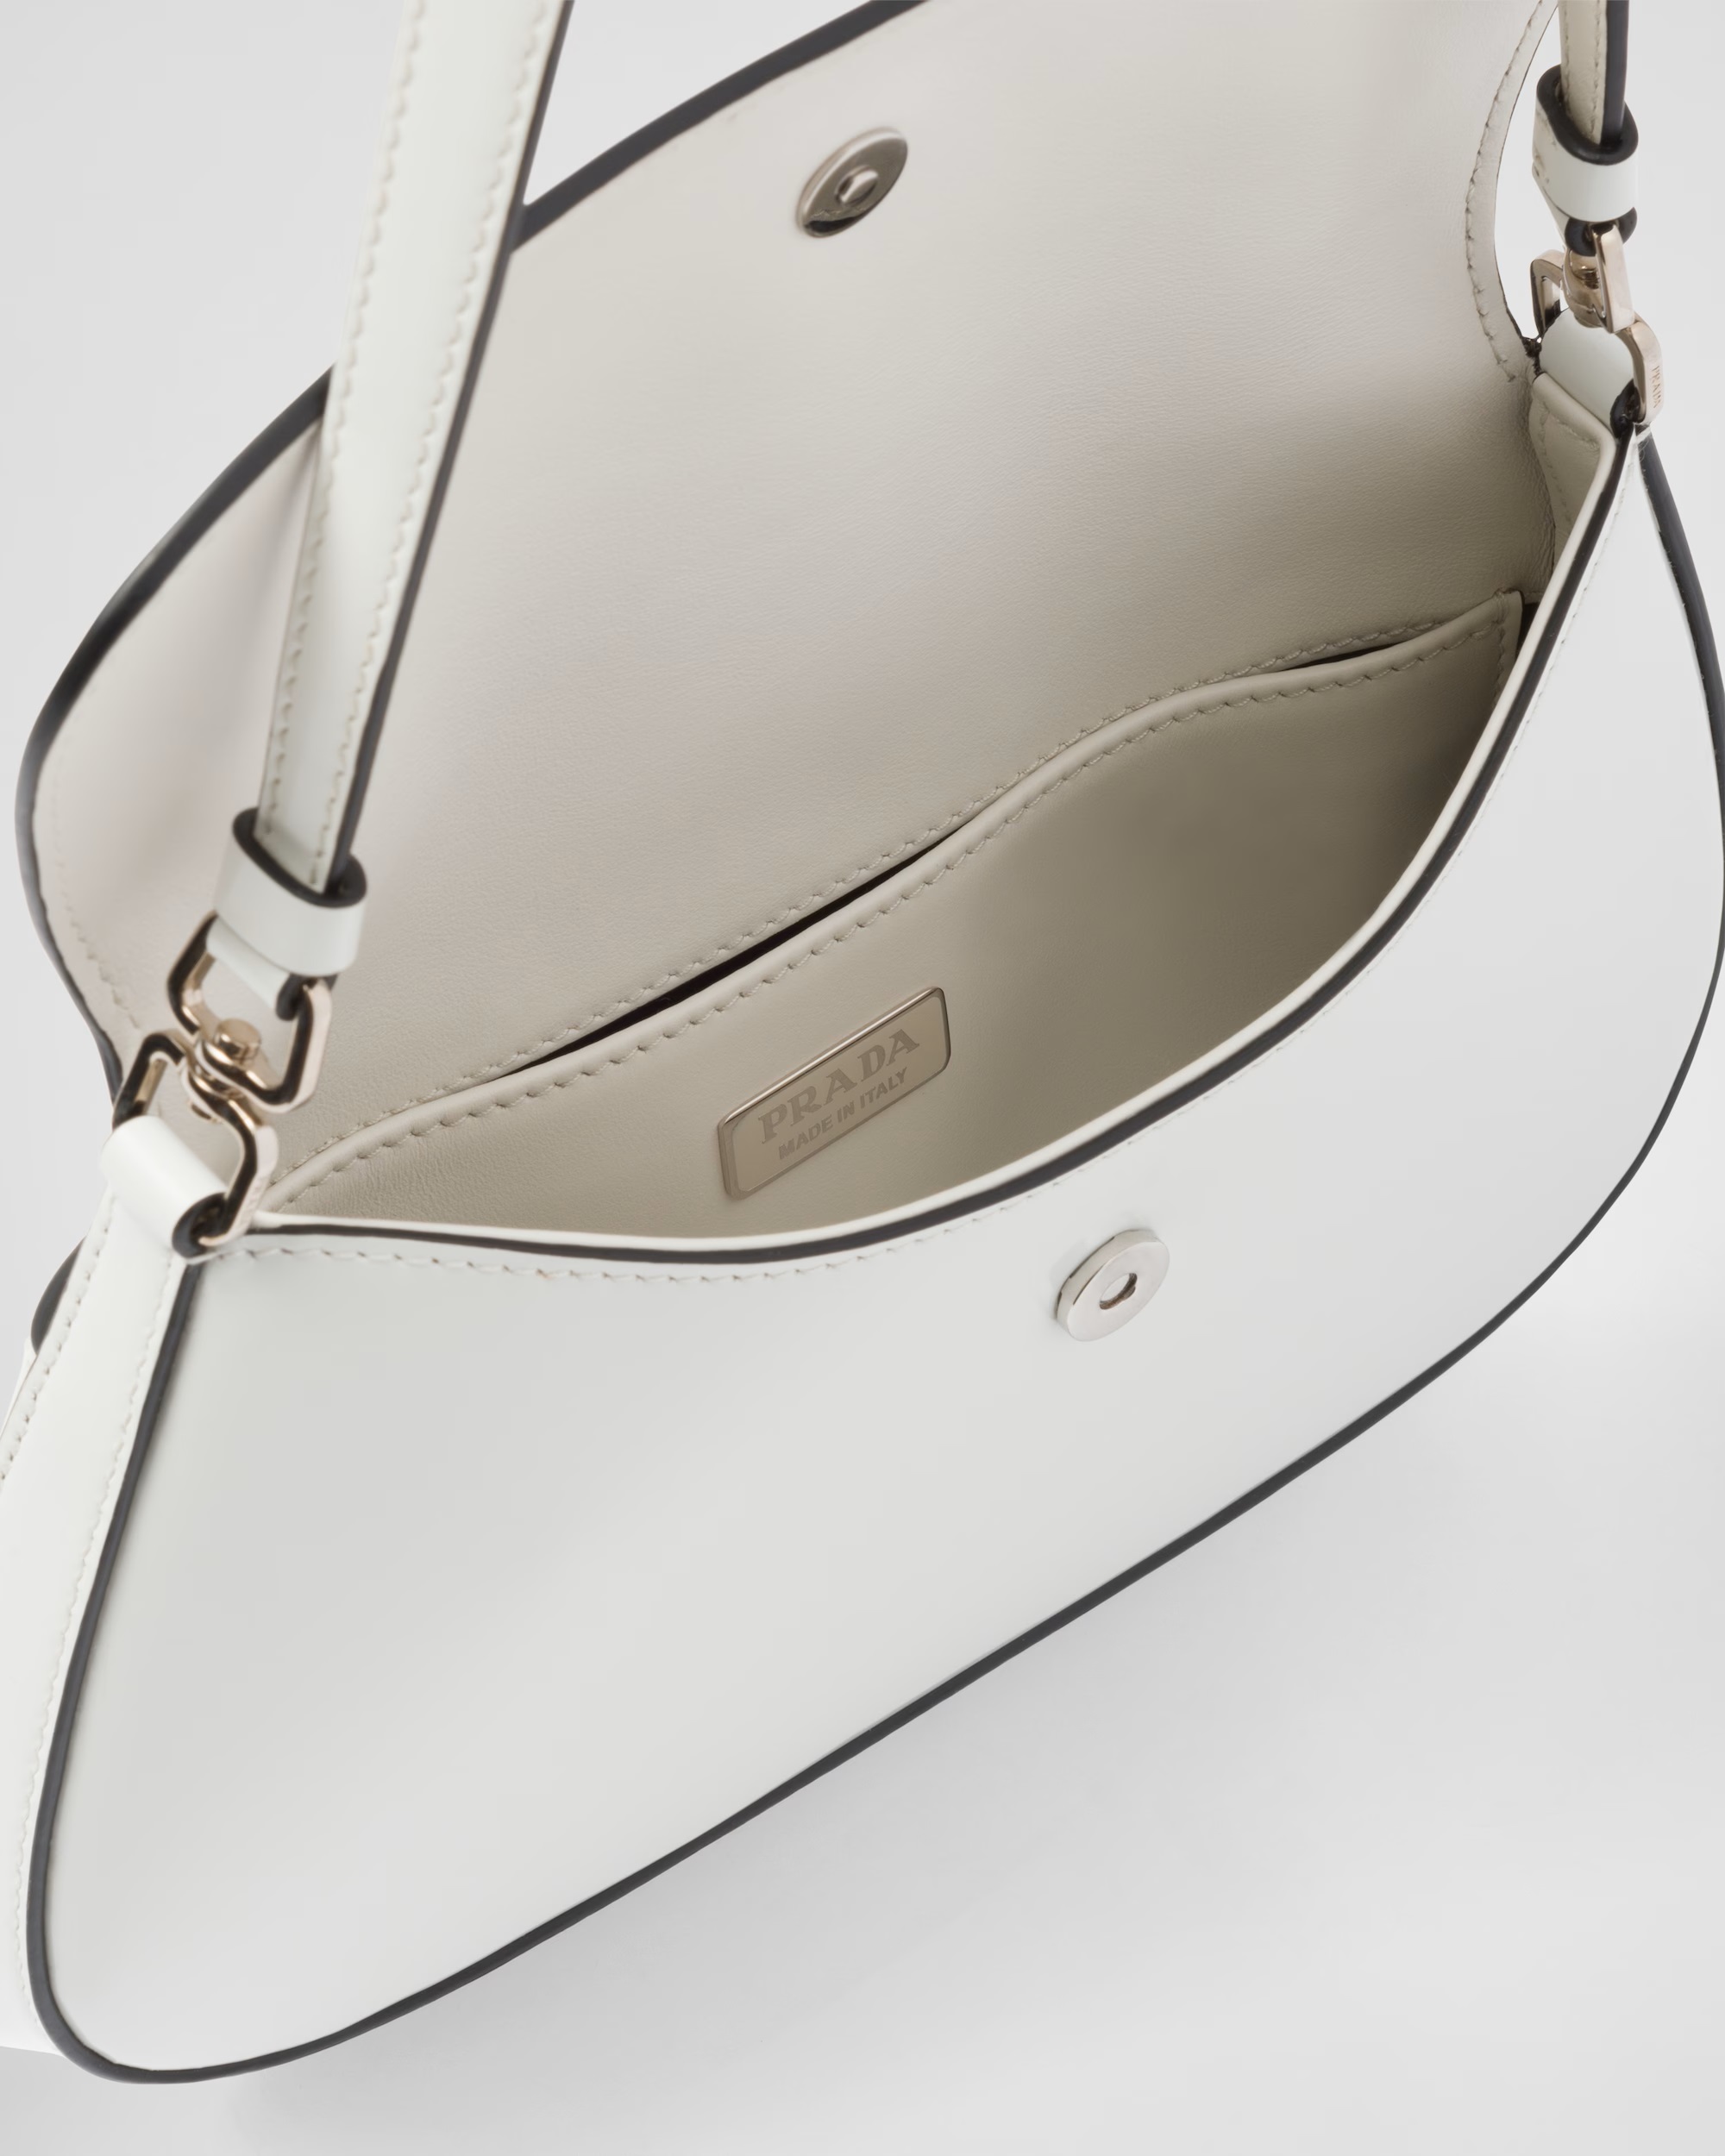 TÚI XÁCH PRADA CLEO BRUSHED LEATHER SHOULDER BAG WITH FLAP 15